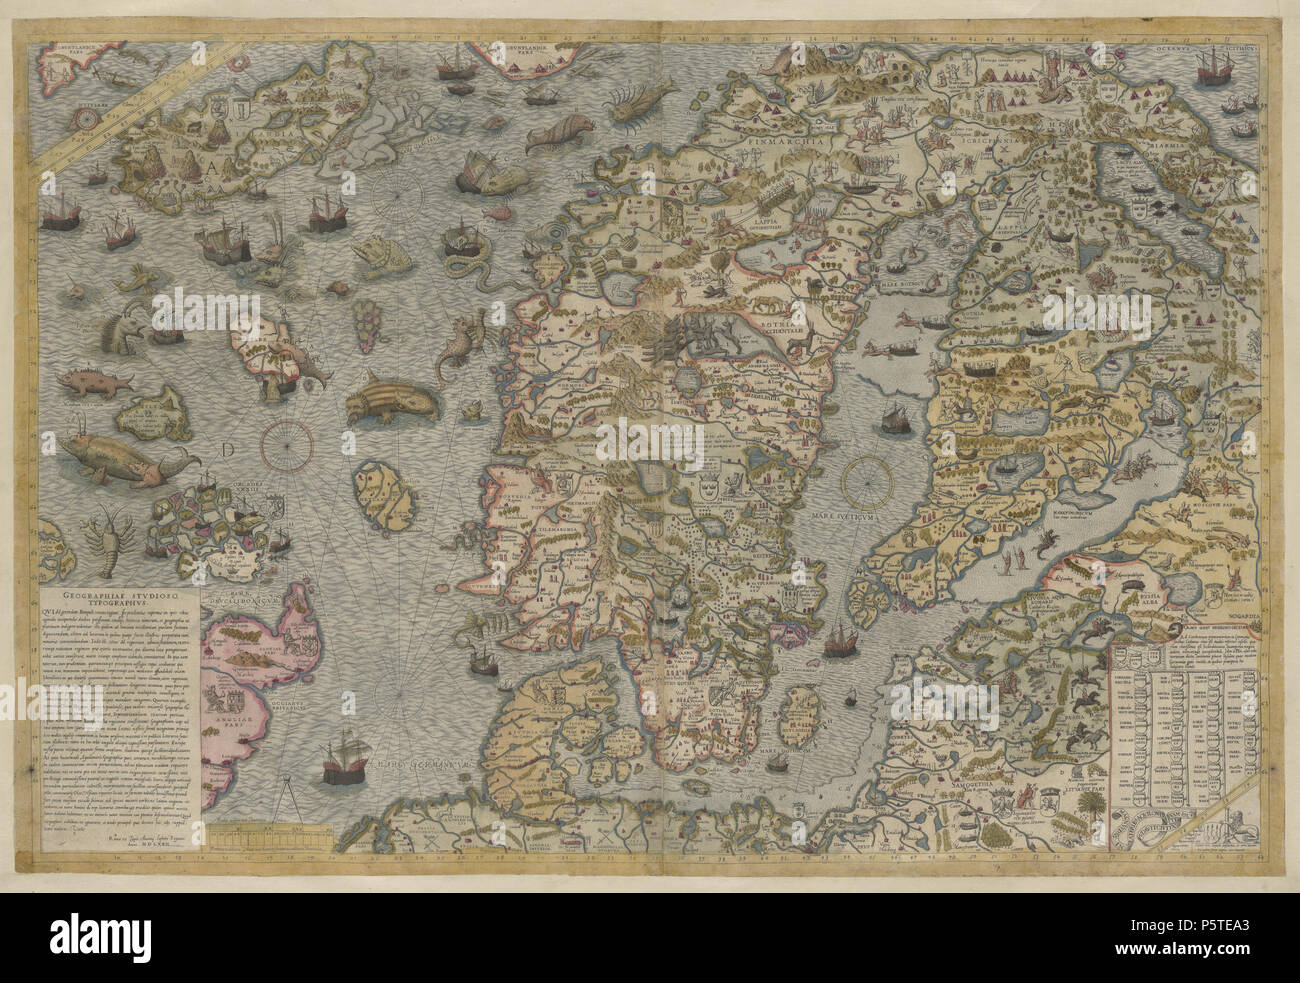 N/A. English: A faithful reproduction of Carta marina (a wallmap of  Scandinavia by Olaus Magnus published in 1539) published by French engraver  Antony Lafreri in Rome in 1572. 1572, based on a